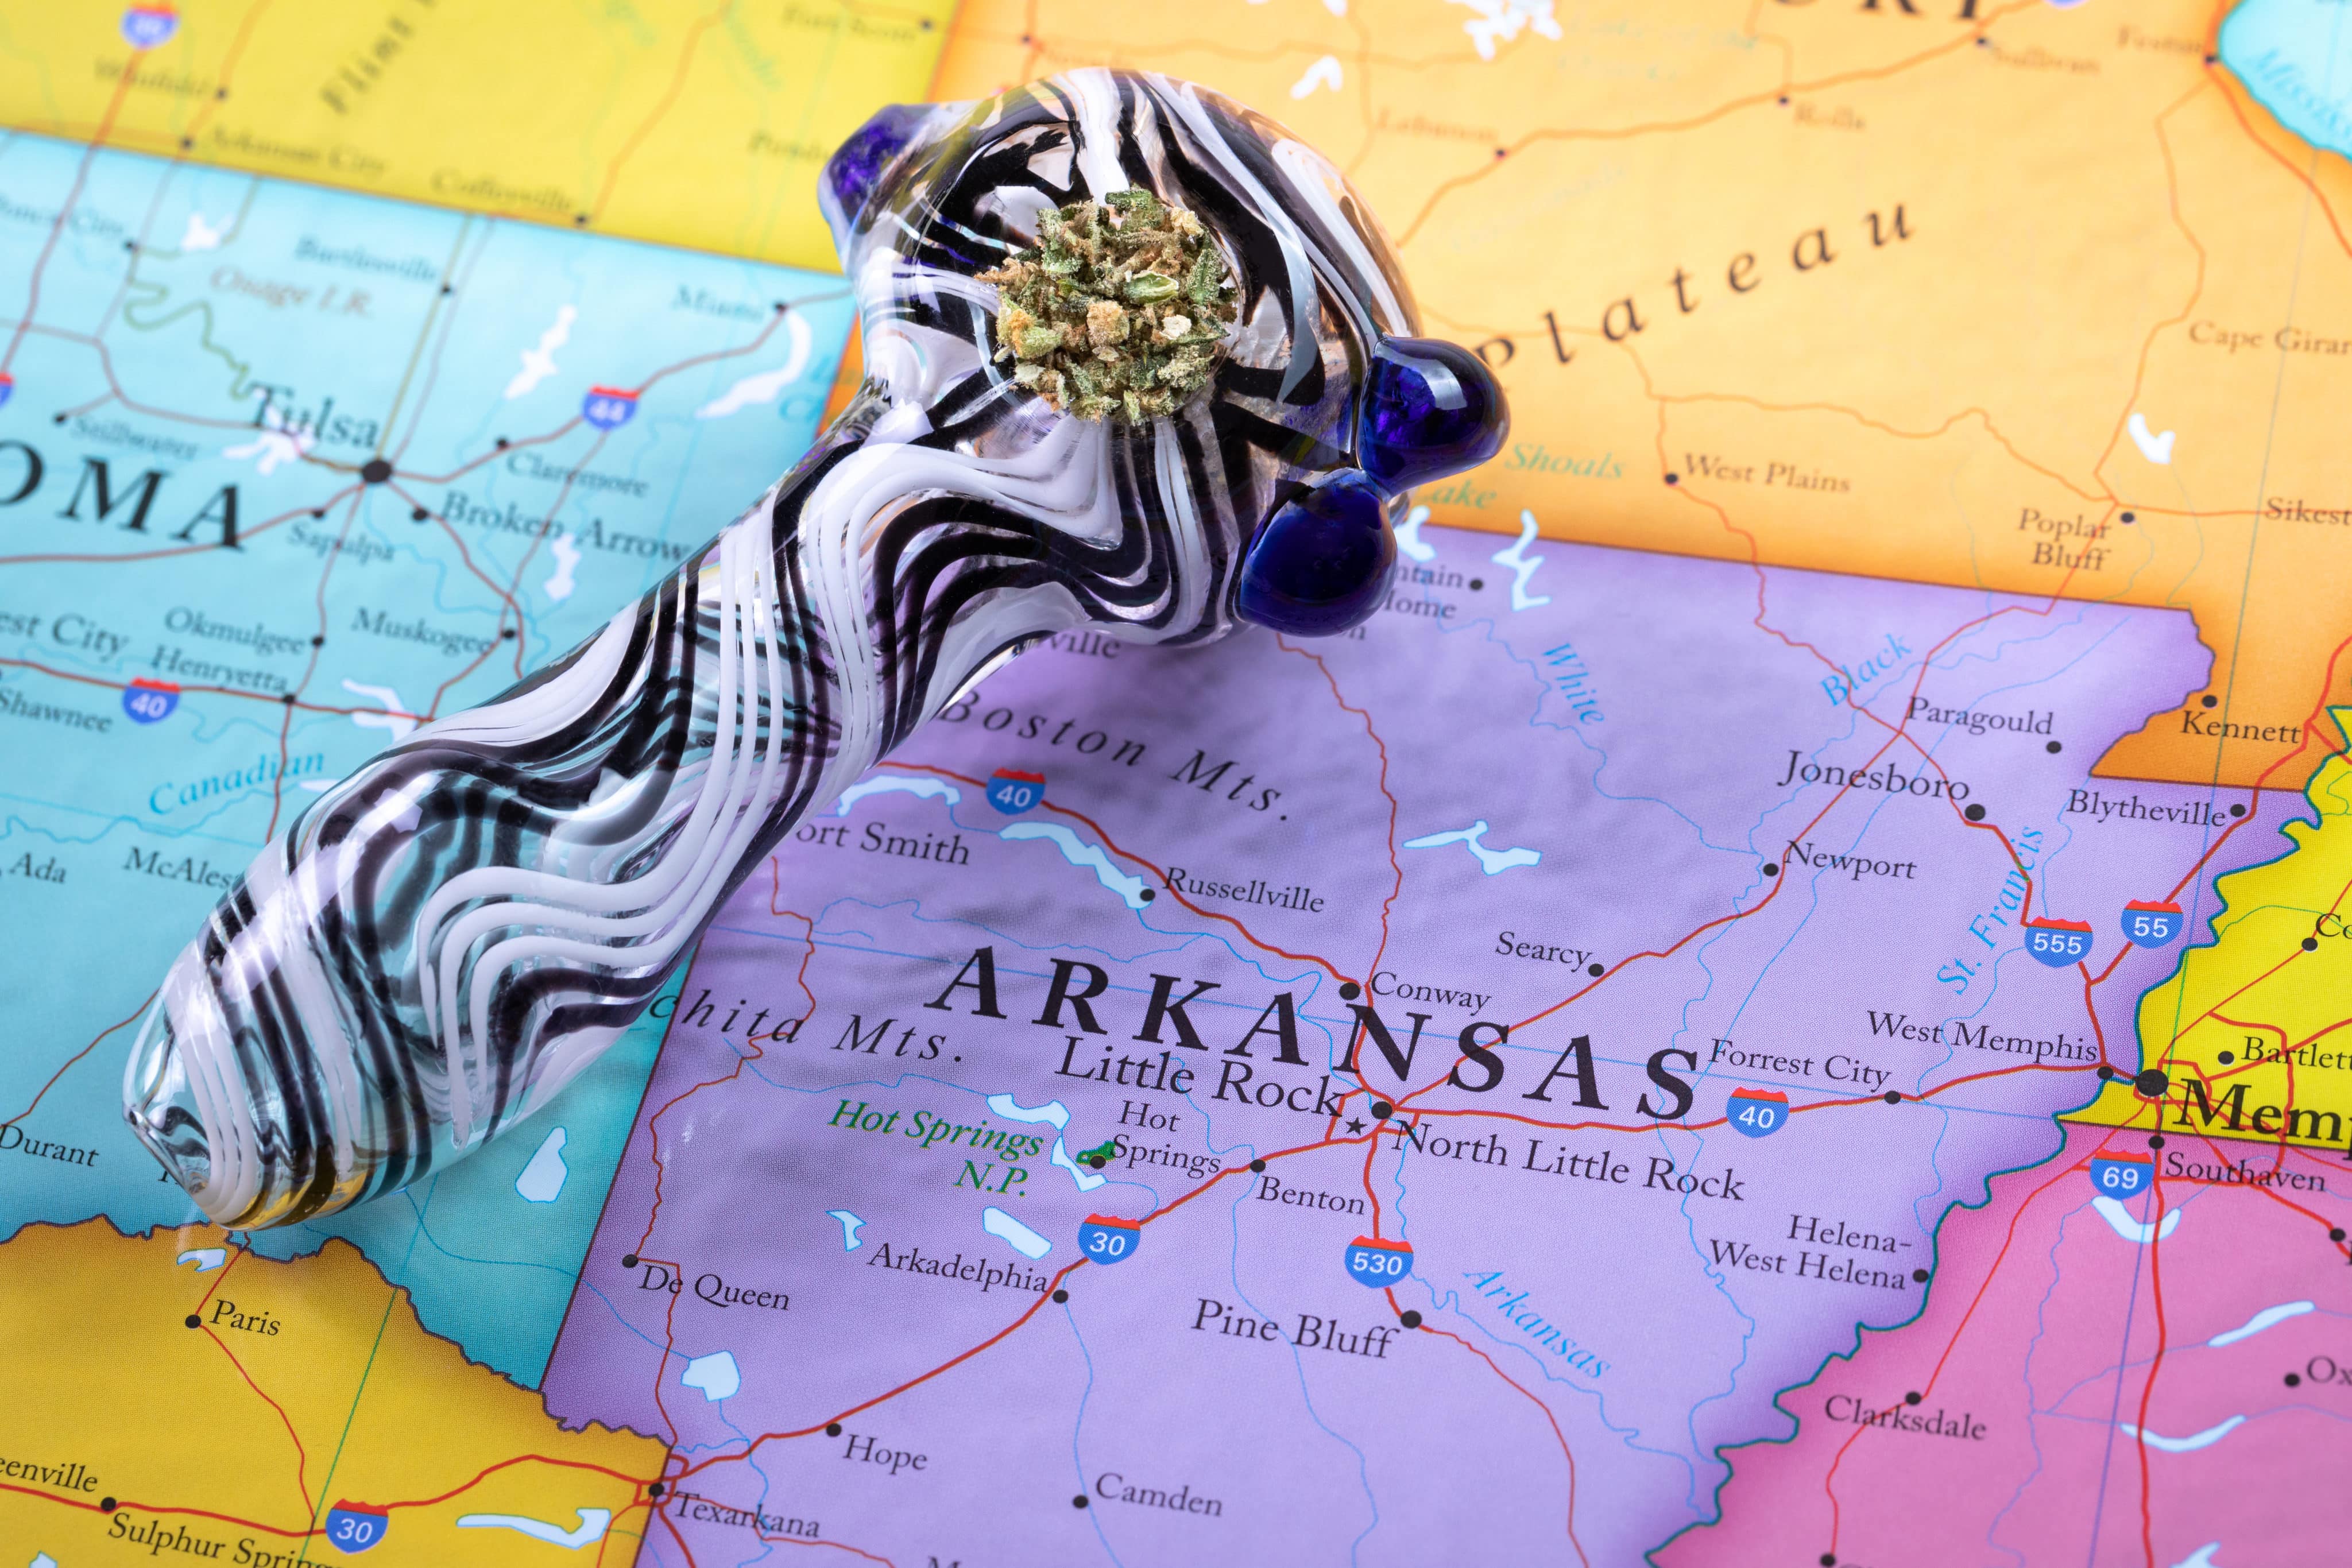 Recreational Pot Question Back on Arkansas Ballot—But Will Votes Count? | High Times